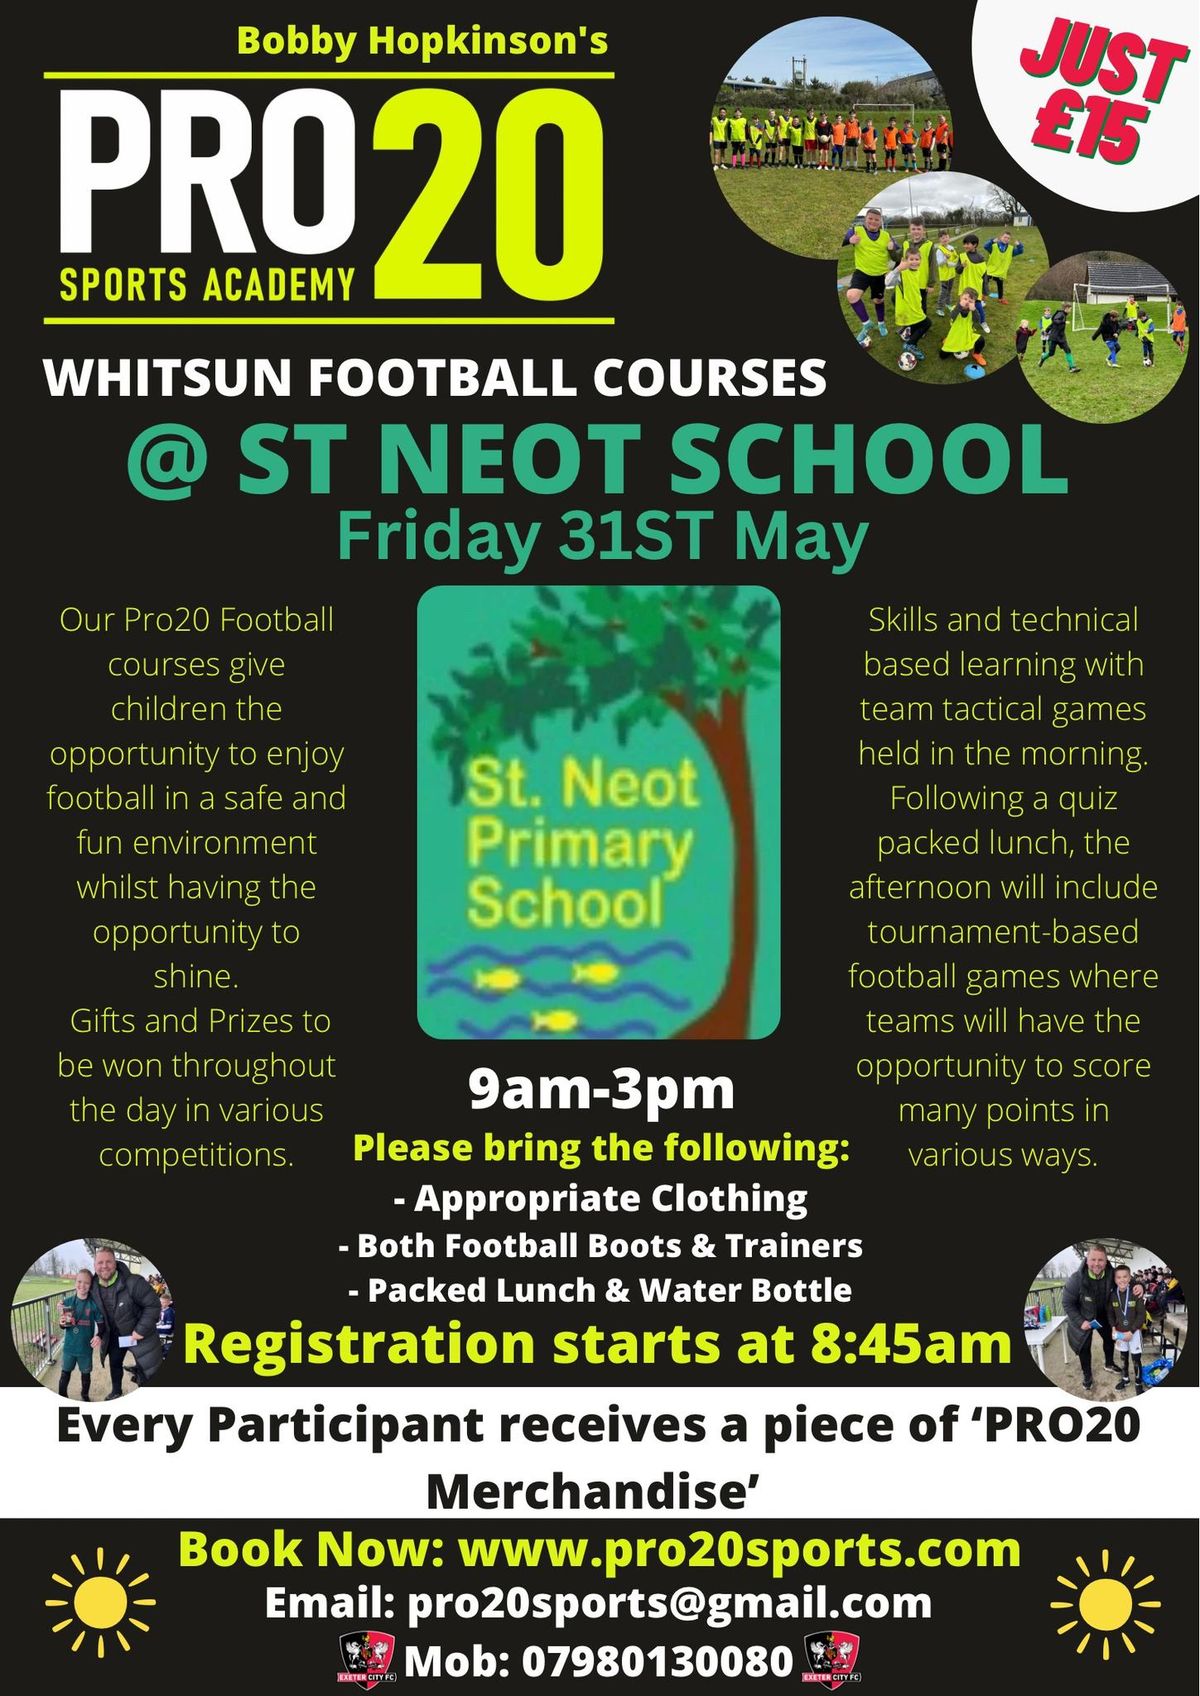 Pro20 Whitsun Football Course at St Neot Primary School